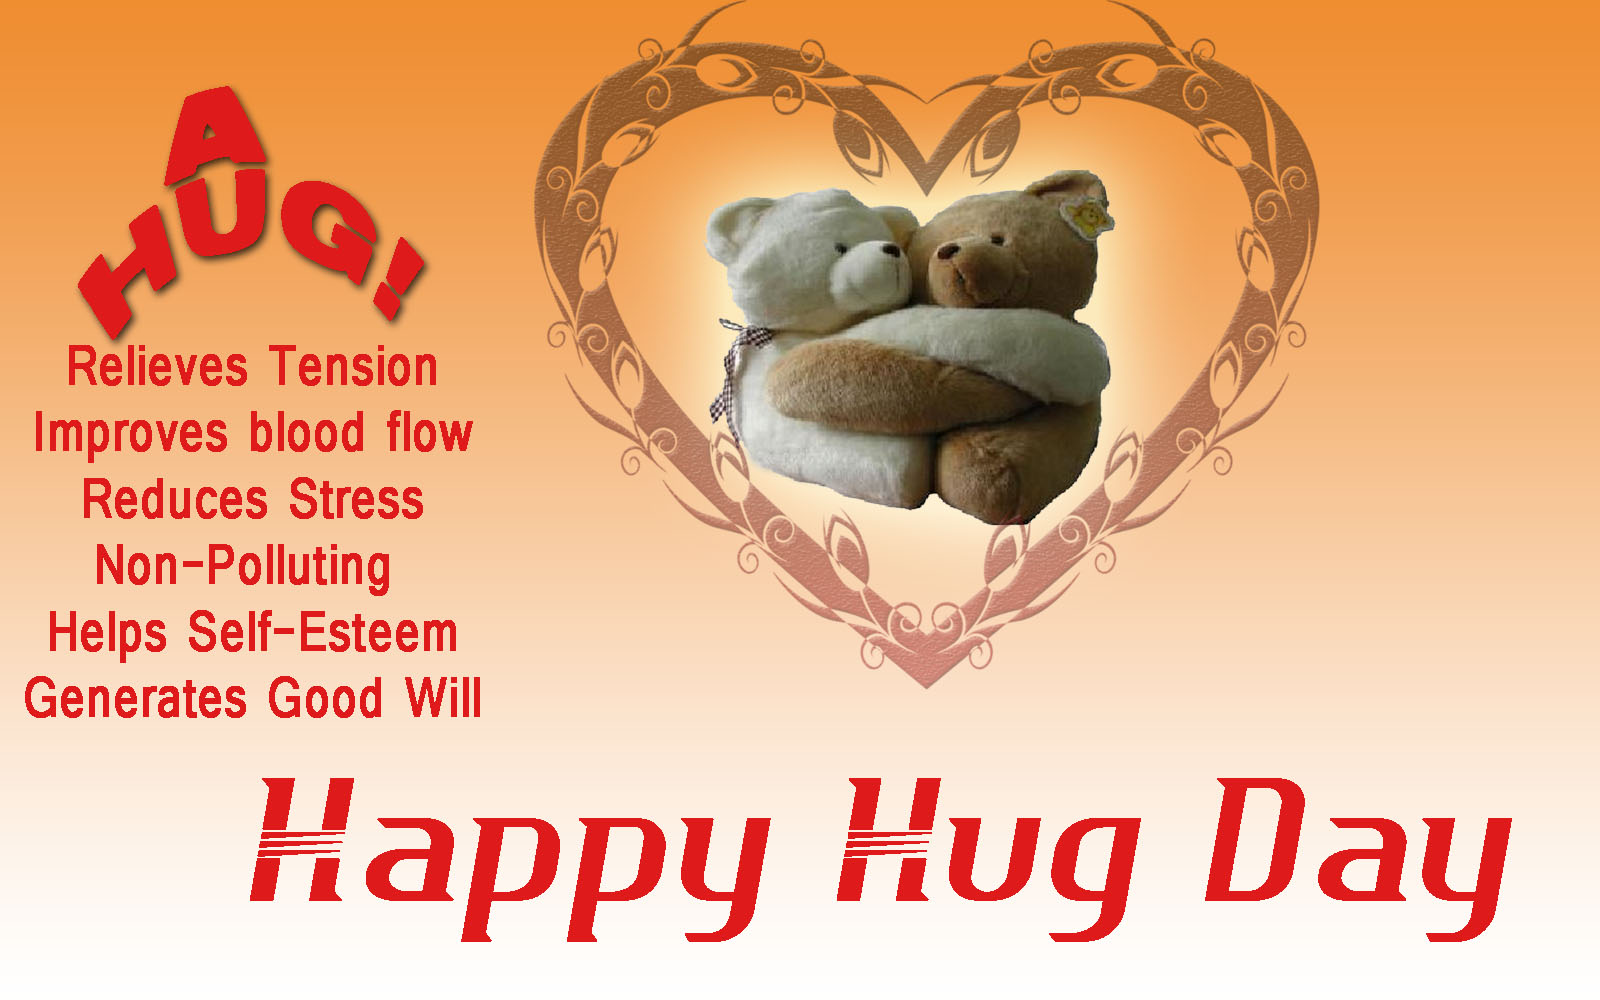 hug day images free for you